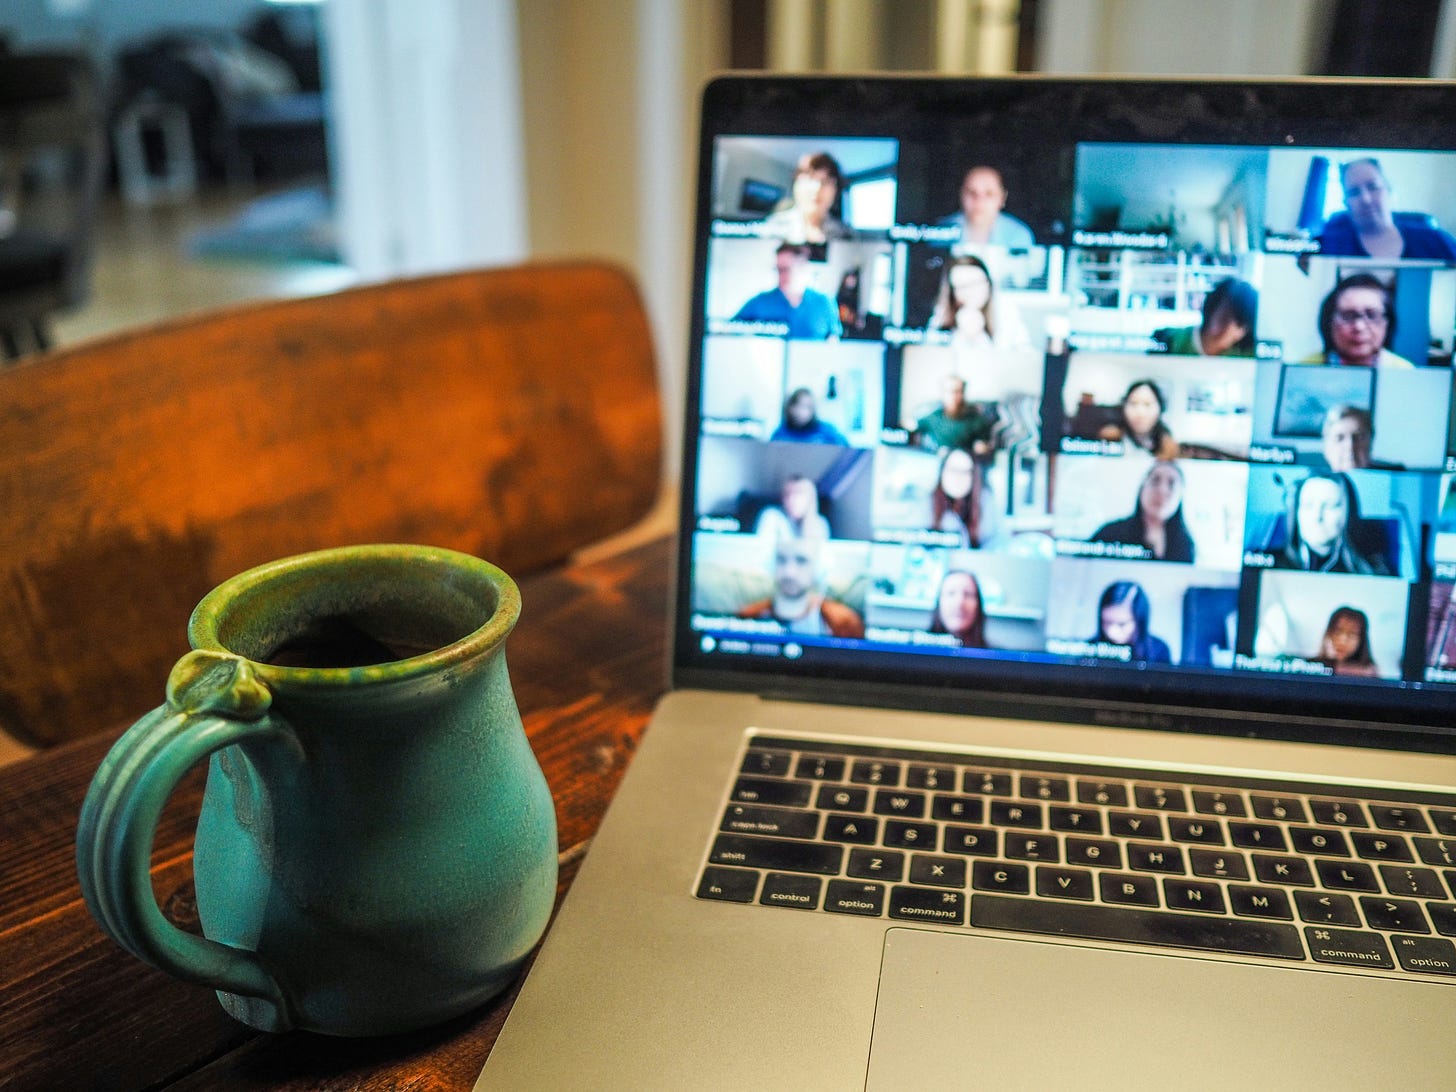 A laptop displaying a Zoom call with multiple participants. A green mug is also visible in the image.